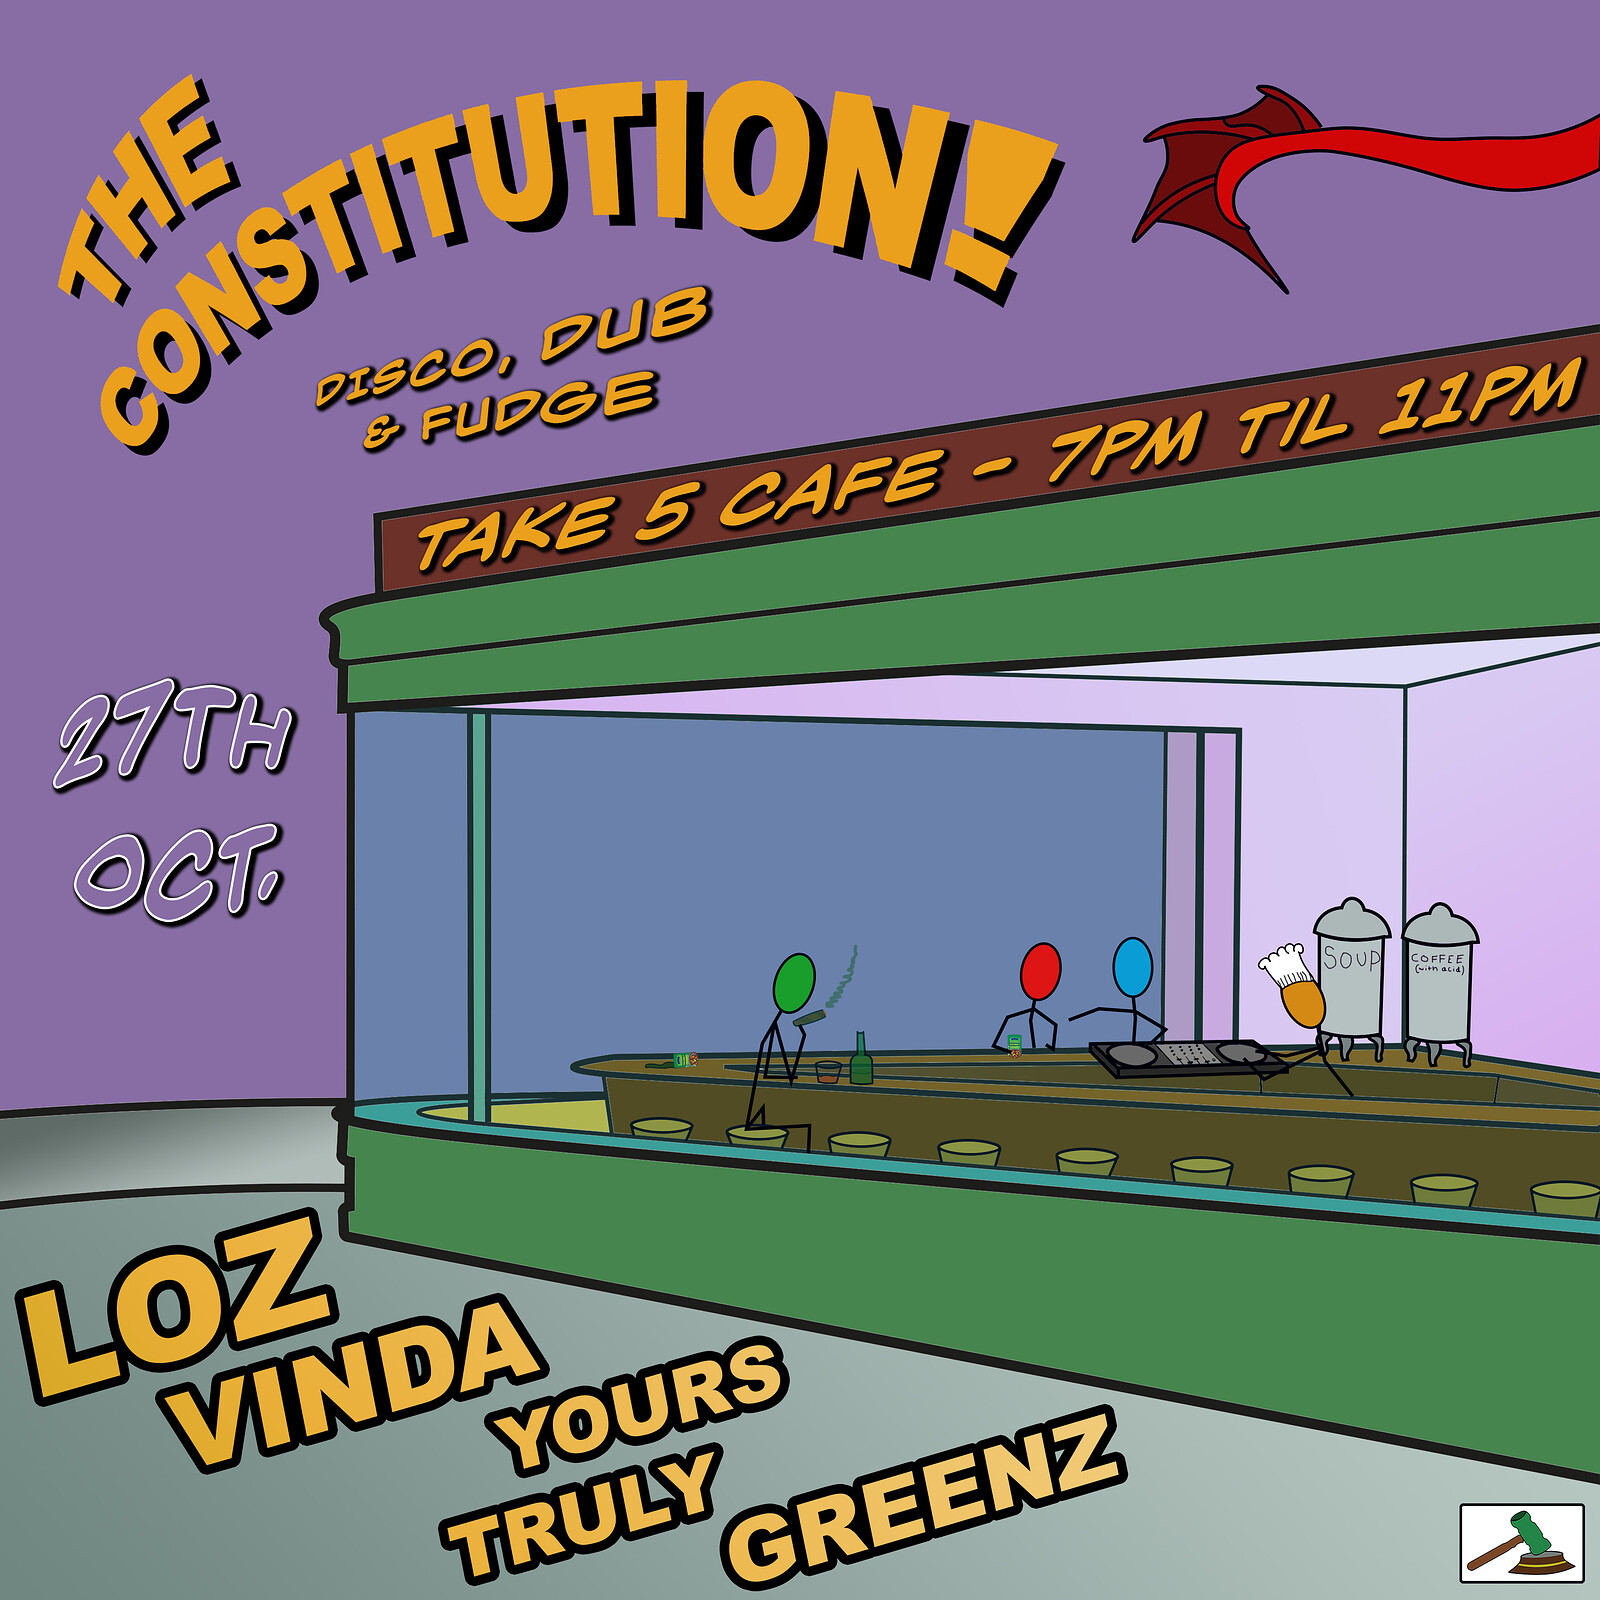 The Constitution: The 'Pre'-Quel at Take Five Cafe